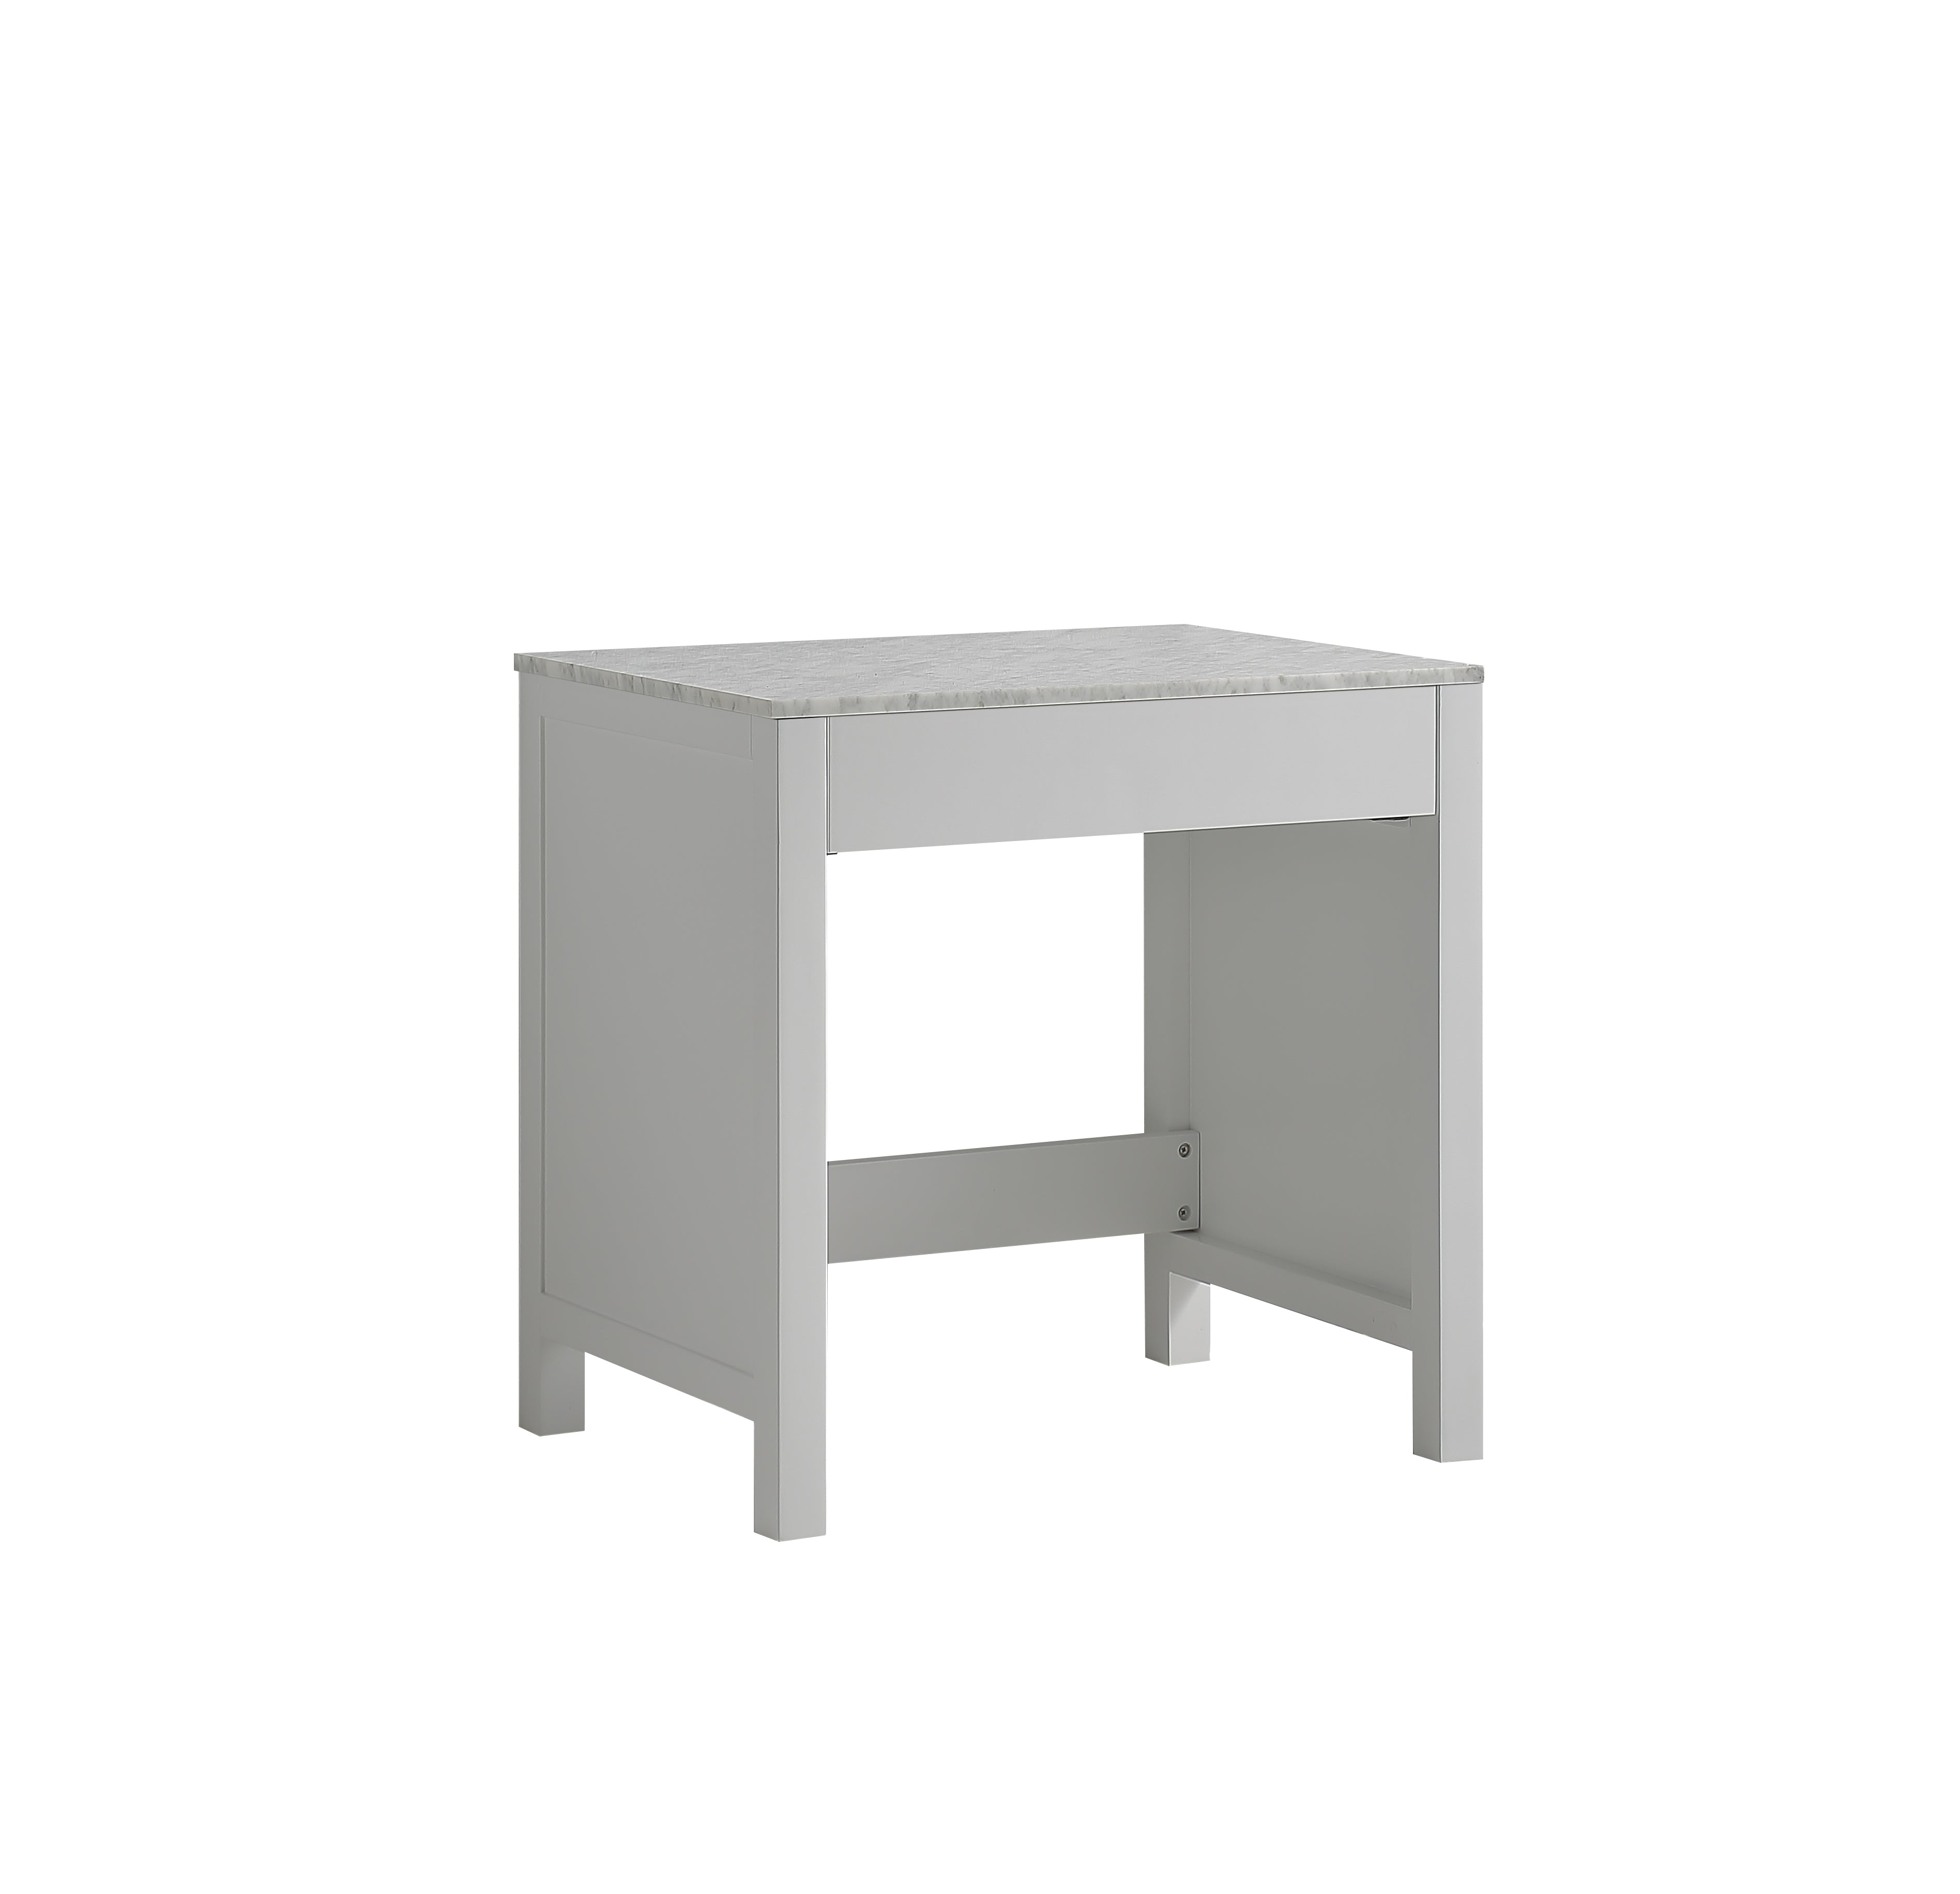 Lexora Jacques LJ302230ADSMTB 30" Make-Up Table in White with White Carrara Marble, Angled View